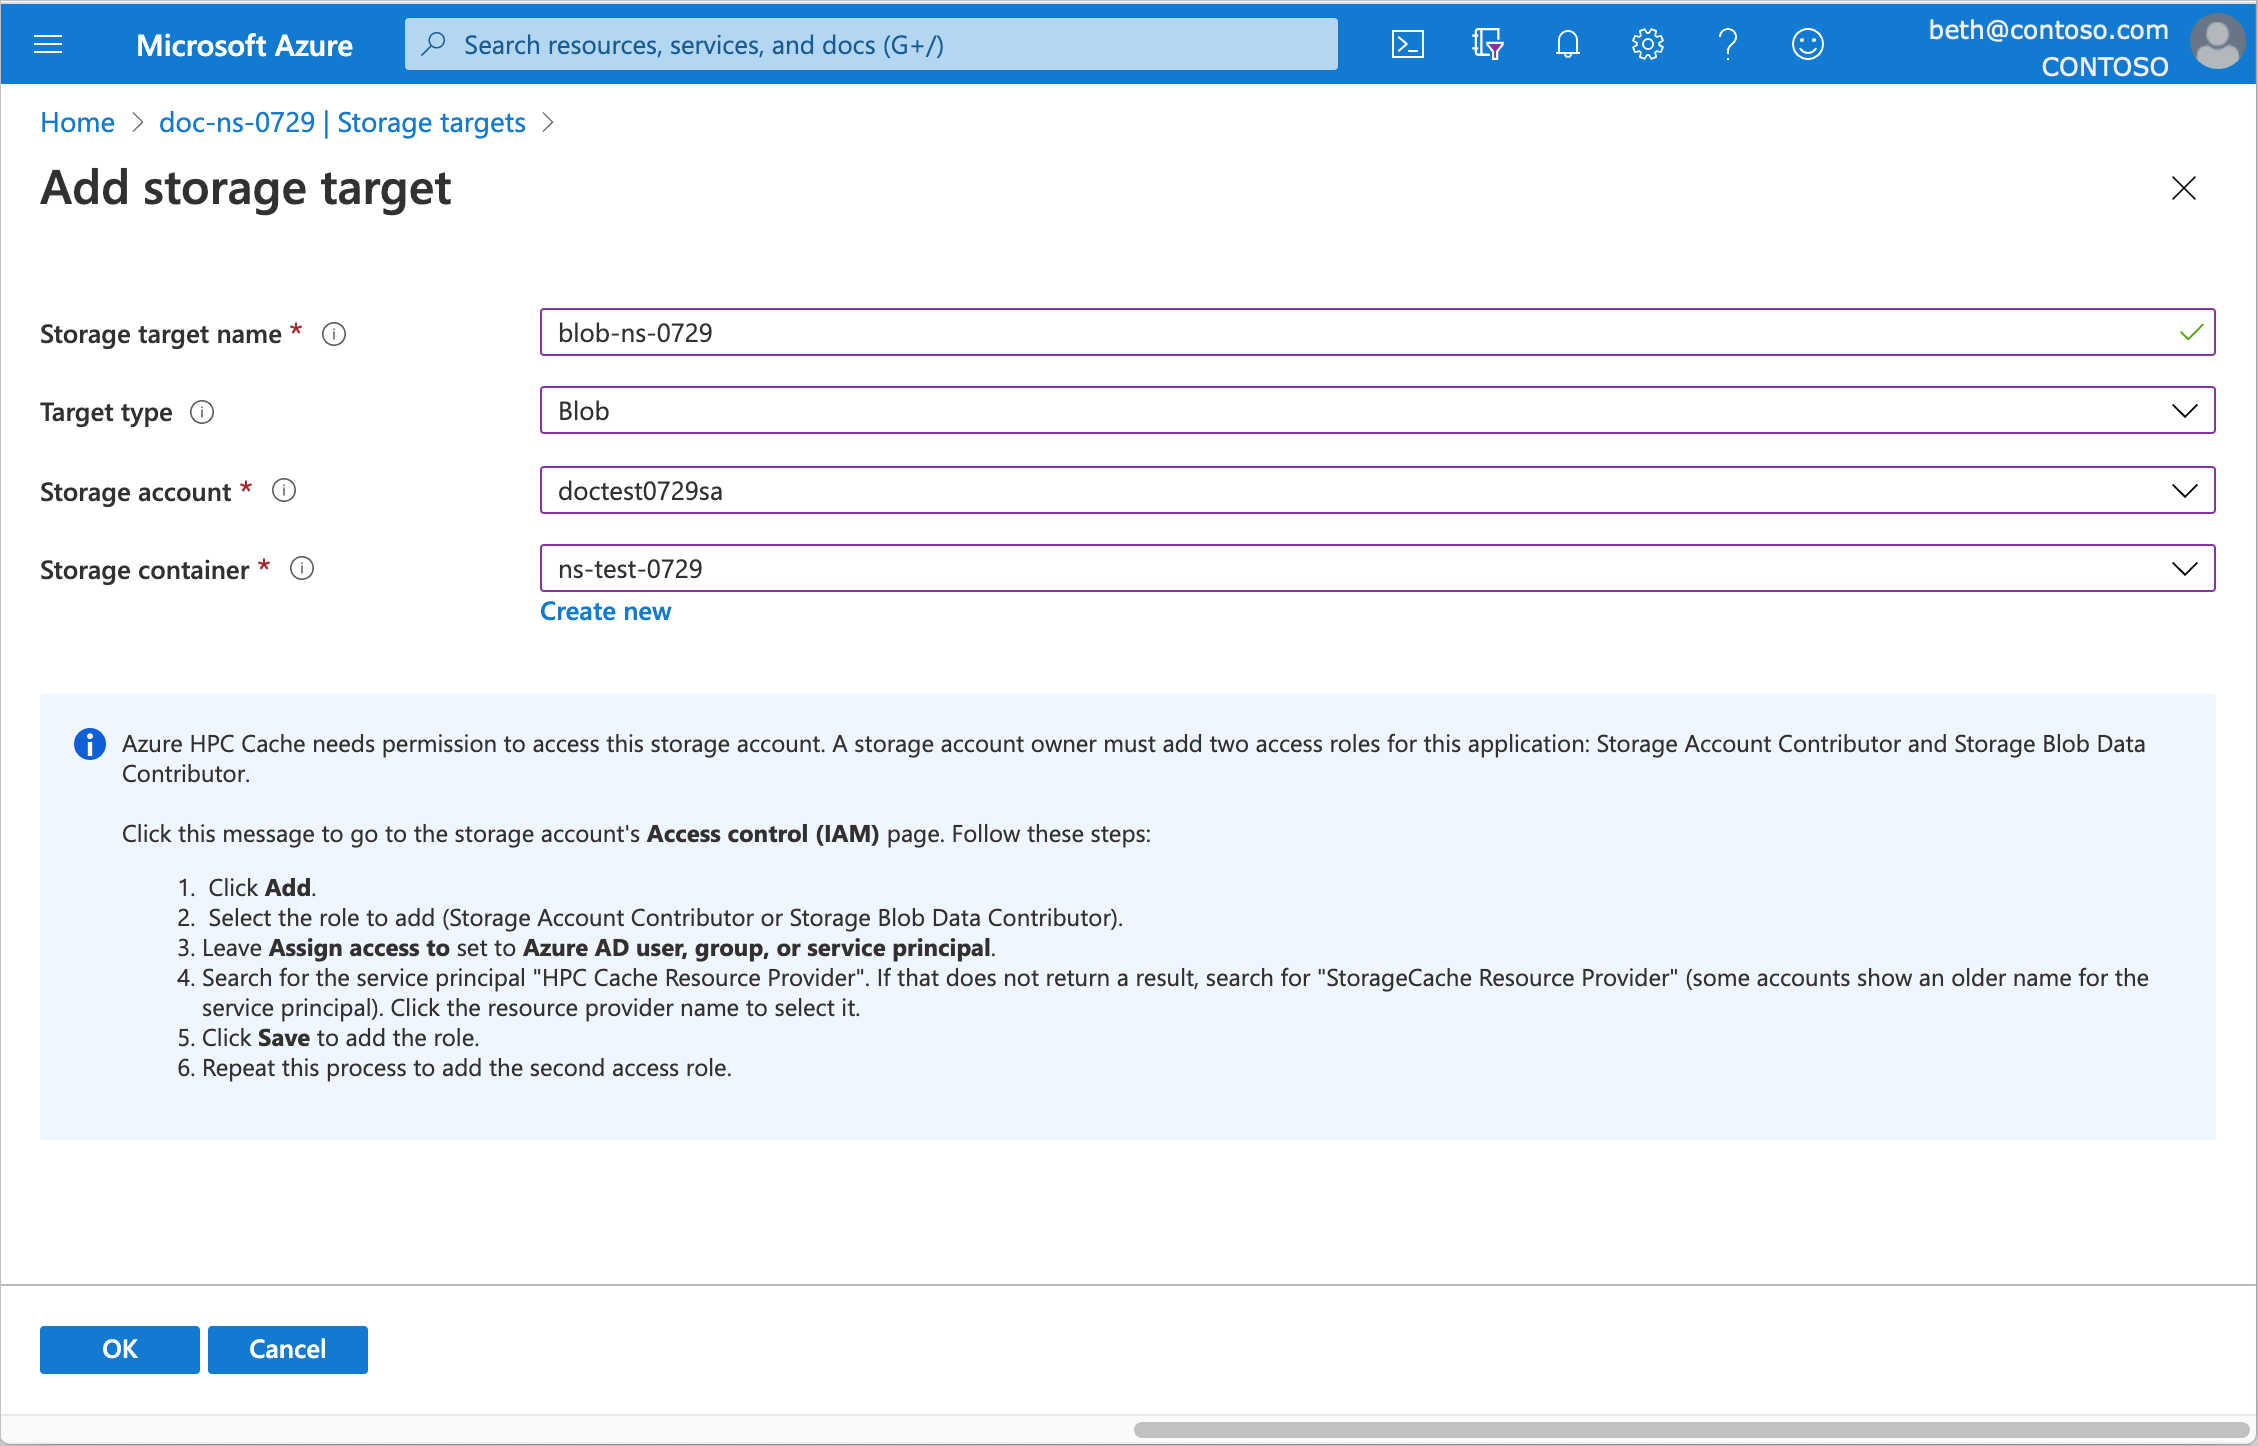 screenshot of the add storage target page, populated with information for a new Azure Blob storage target